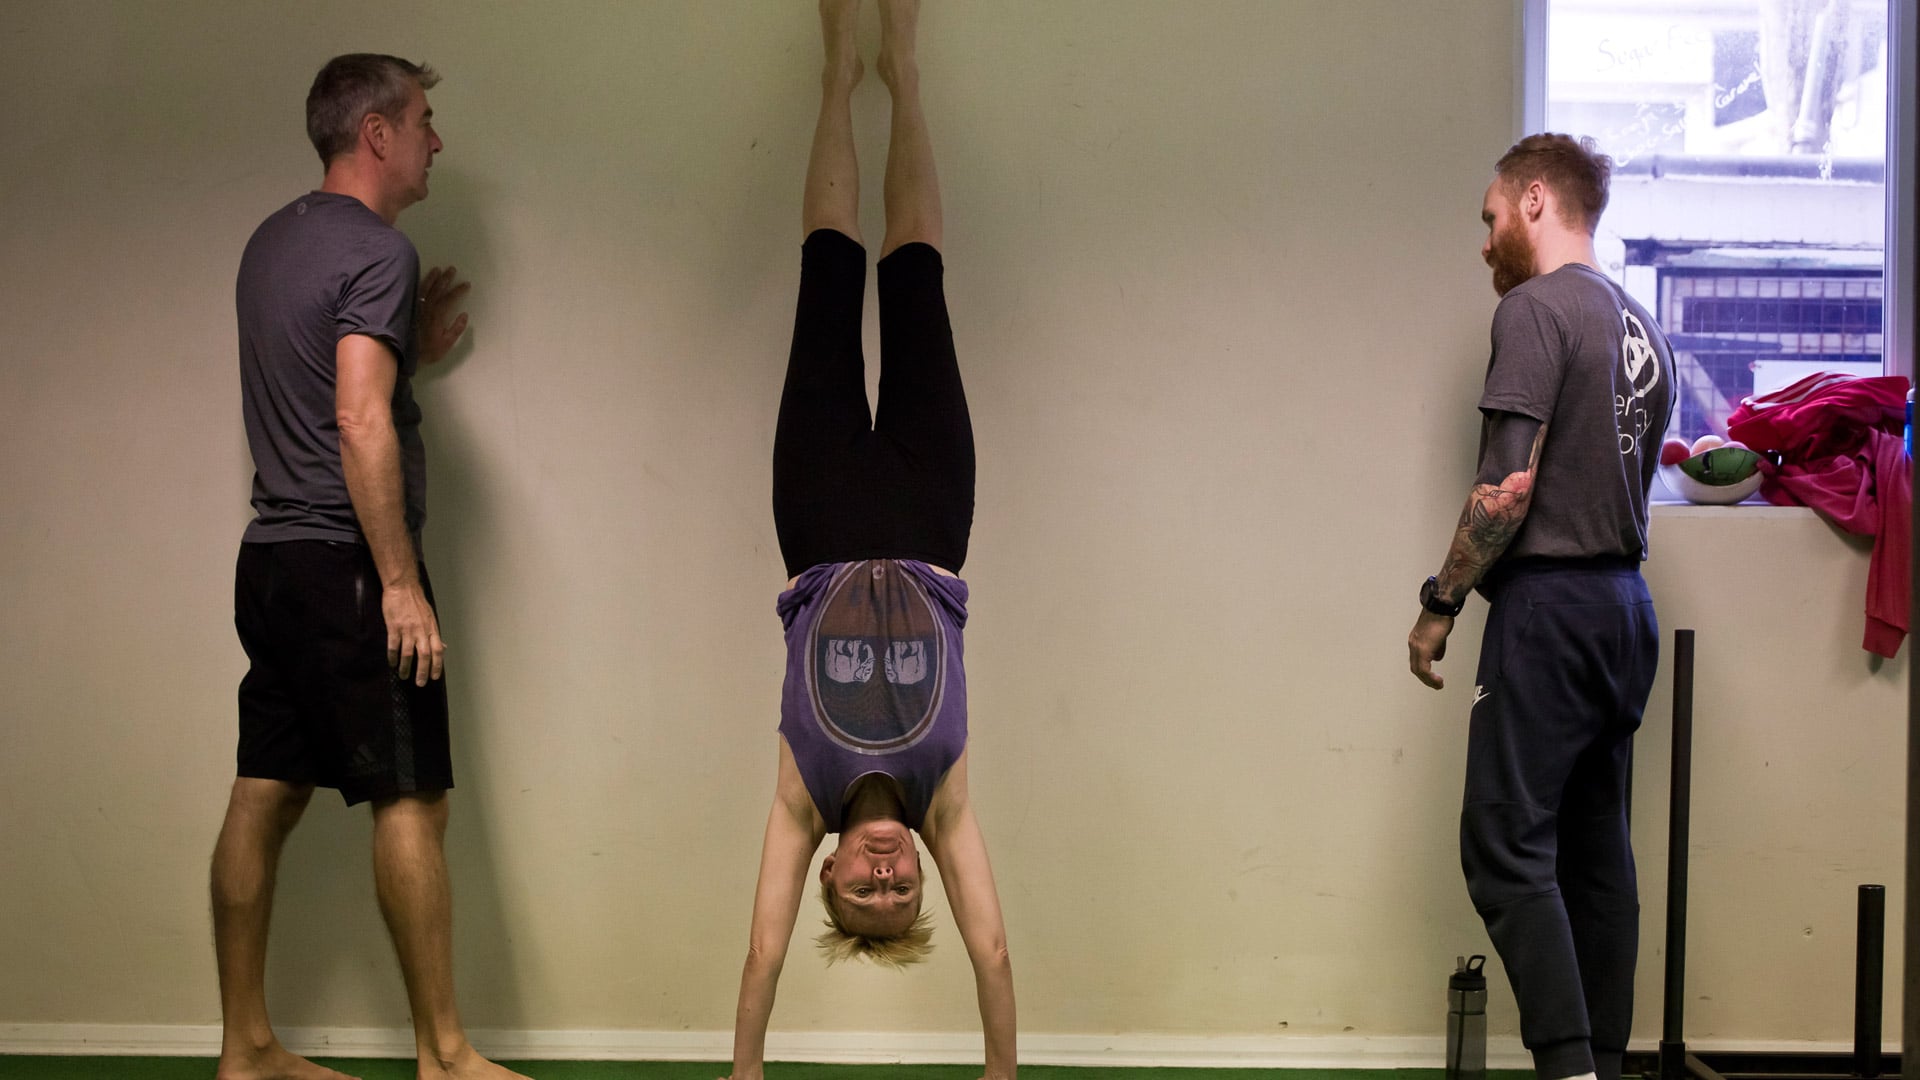 Lady learning handstands